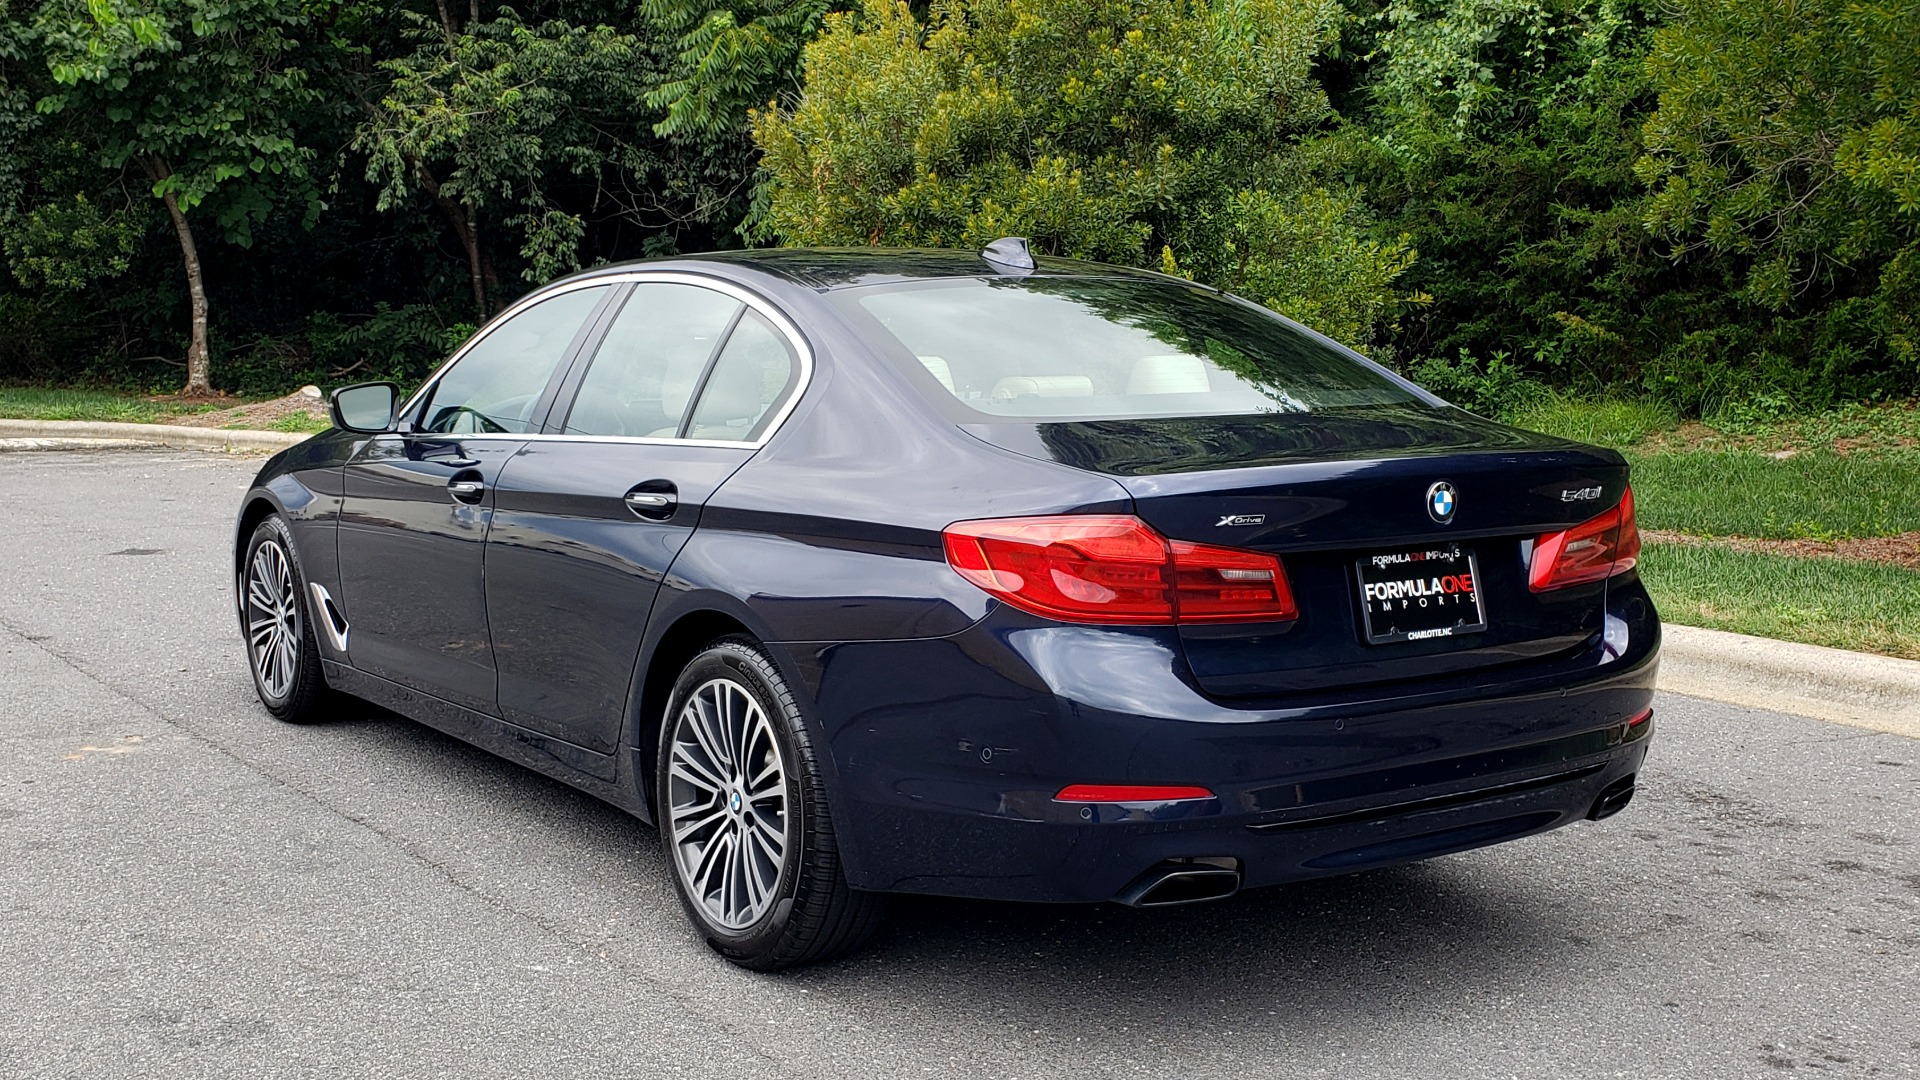 Used 2017 BMW 5 SERIES 540I XDRIVE PREMIUM / NAV / DRVR ASST / CLD WTHR / SUNROOF / REARVIEW for sale Sold at Formula Imports in Charlotte NC 28227 3